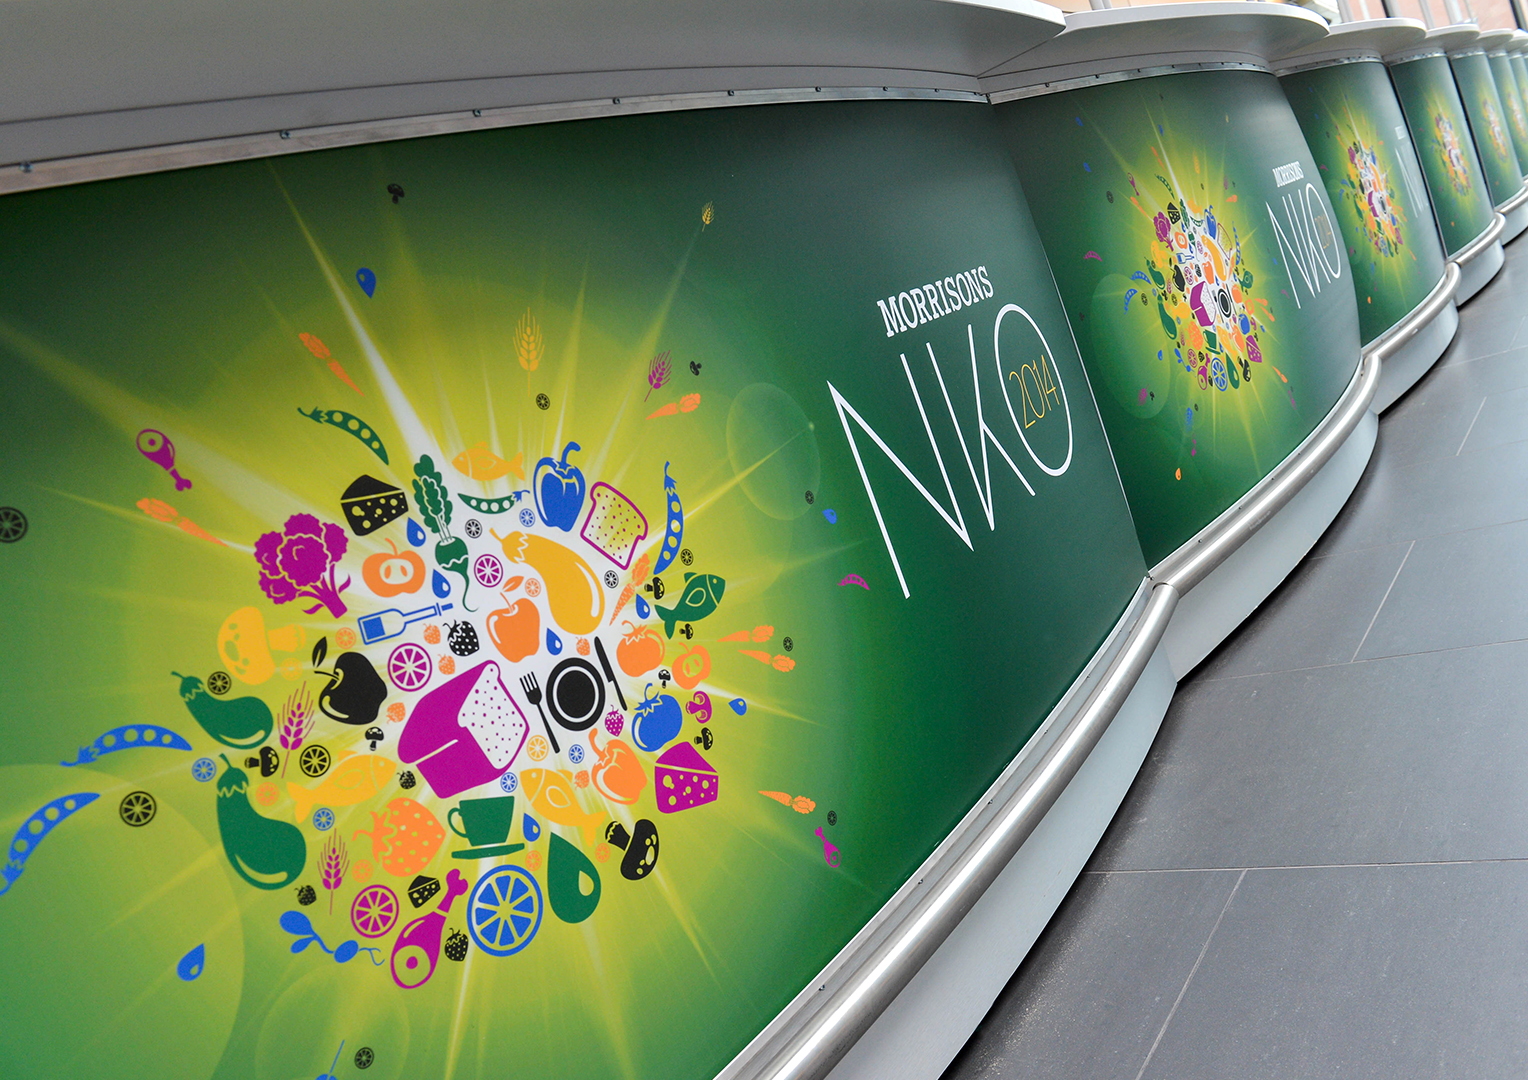 Morrisons. National Kick Off Event. Signage and event space branding. Creative artwork and graphic design.